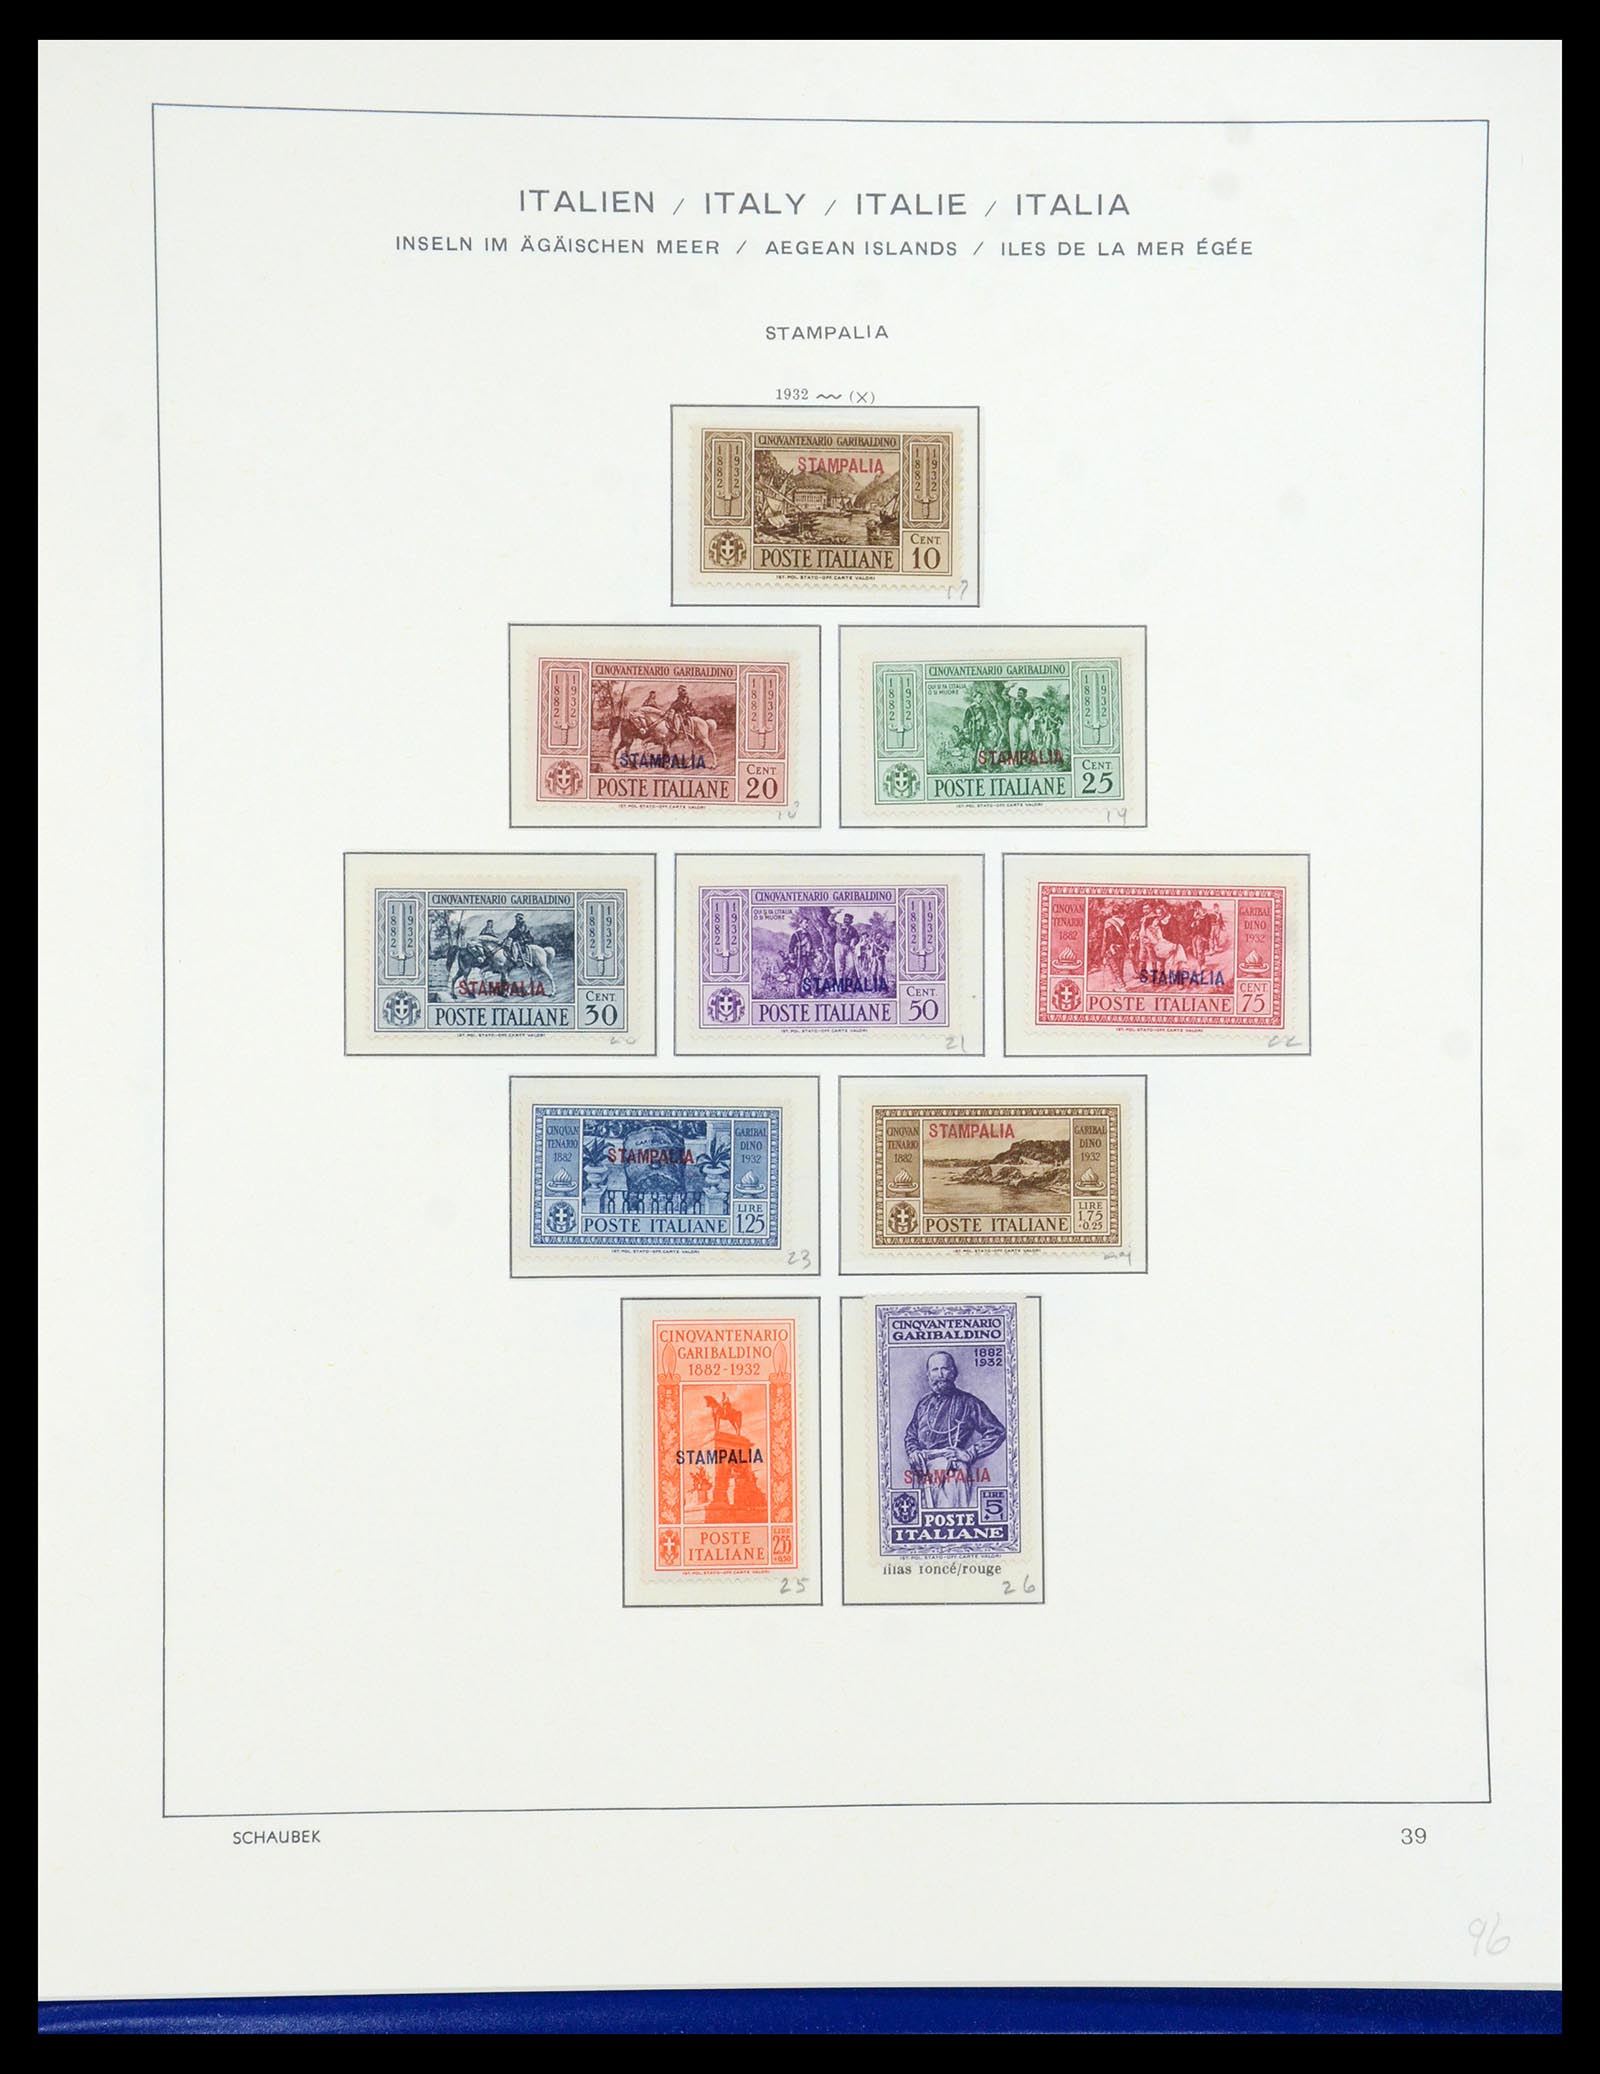 36181 054 - Stamp collection 36181 Italian Aegean Islands 1912-1941.